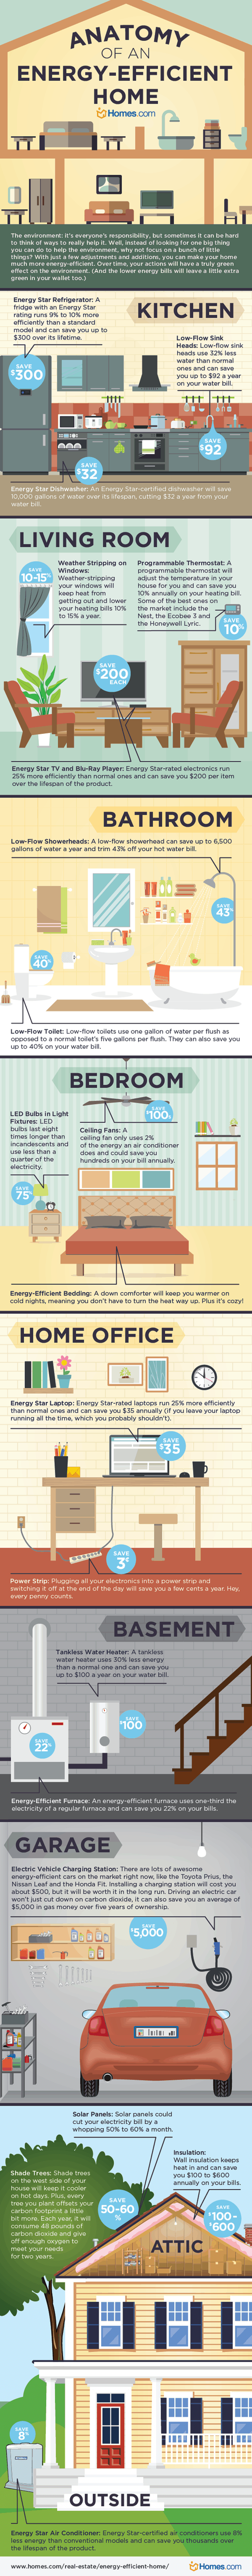 easy-ways-to-make-your-home-energy-efficient-infographic